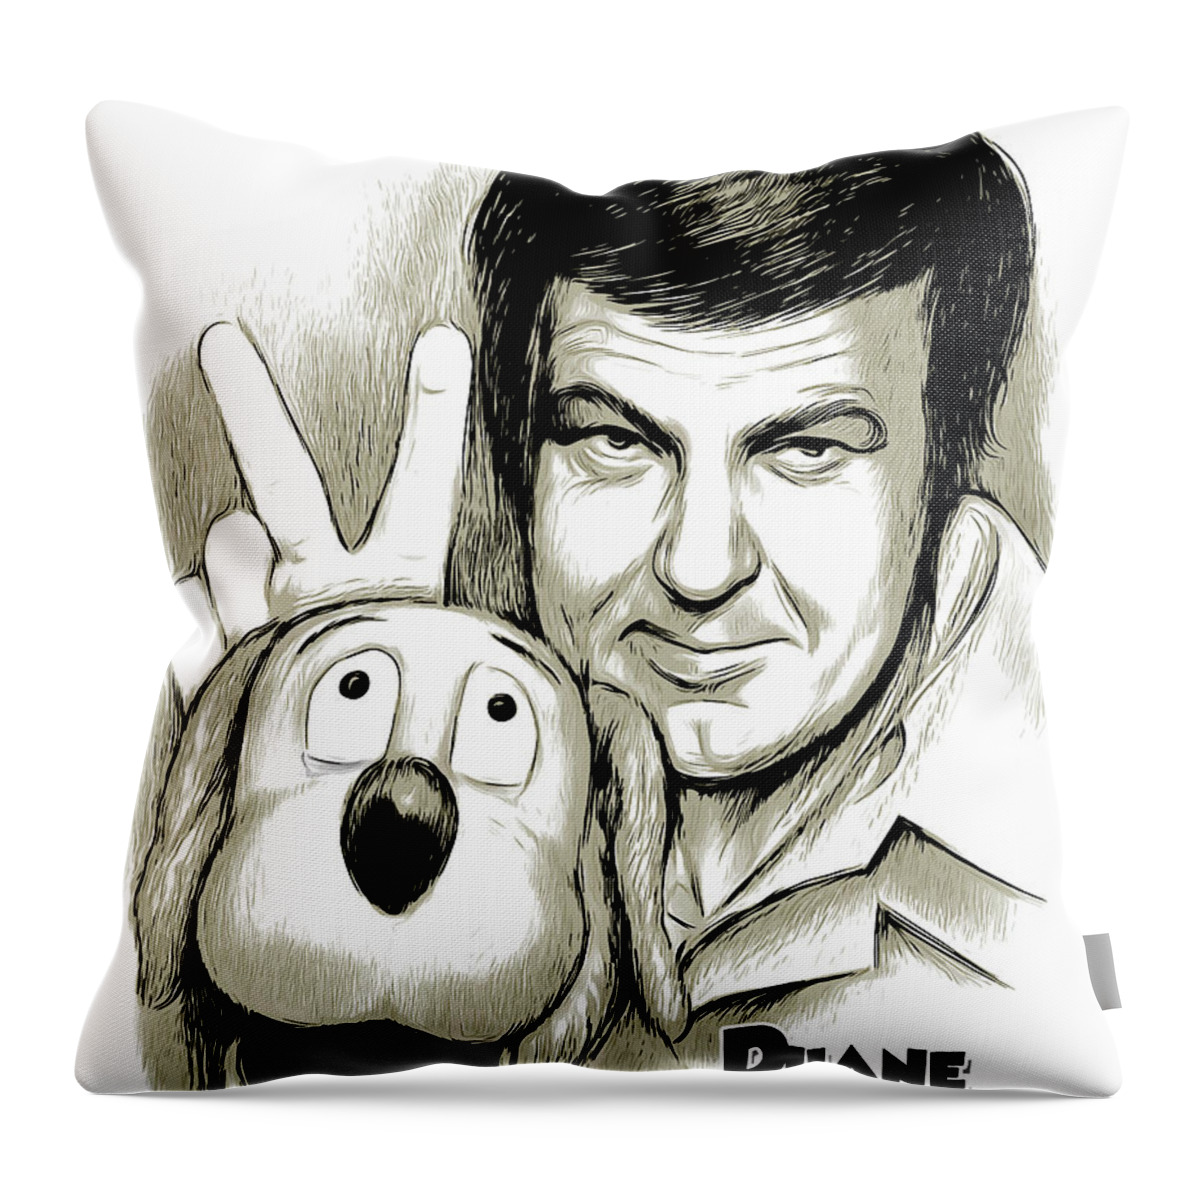 Iowa Throw Pillow featuring the mixed media Duane and Floppy by Greg Joens